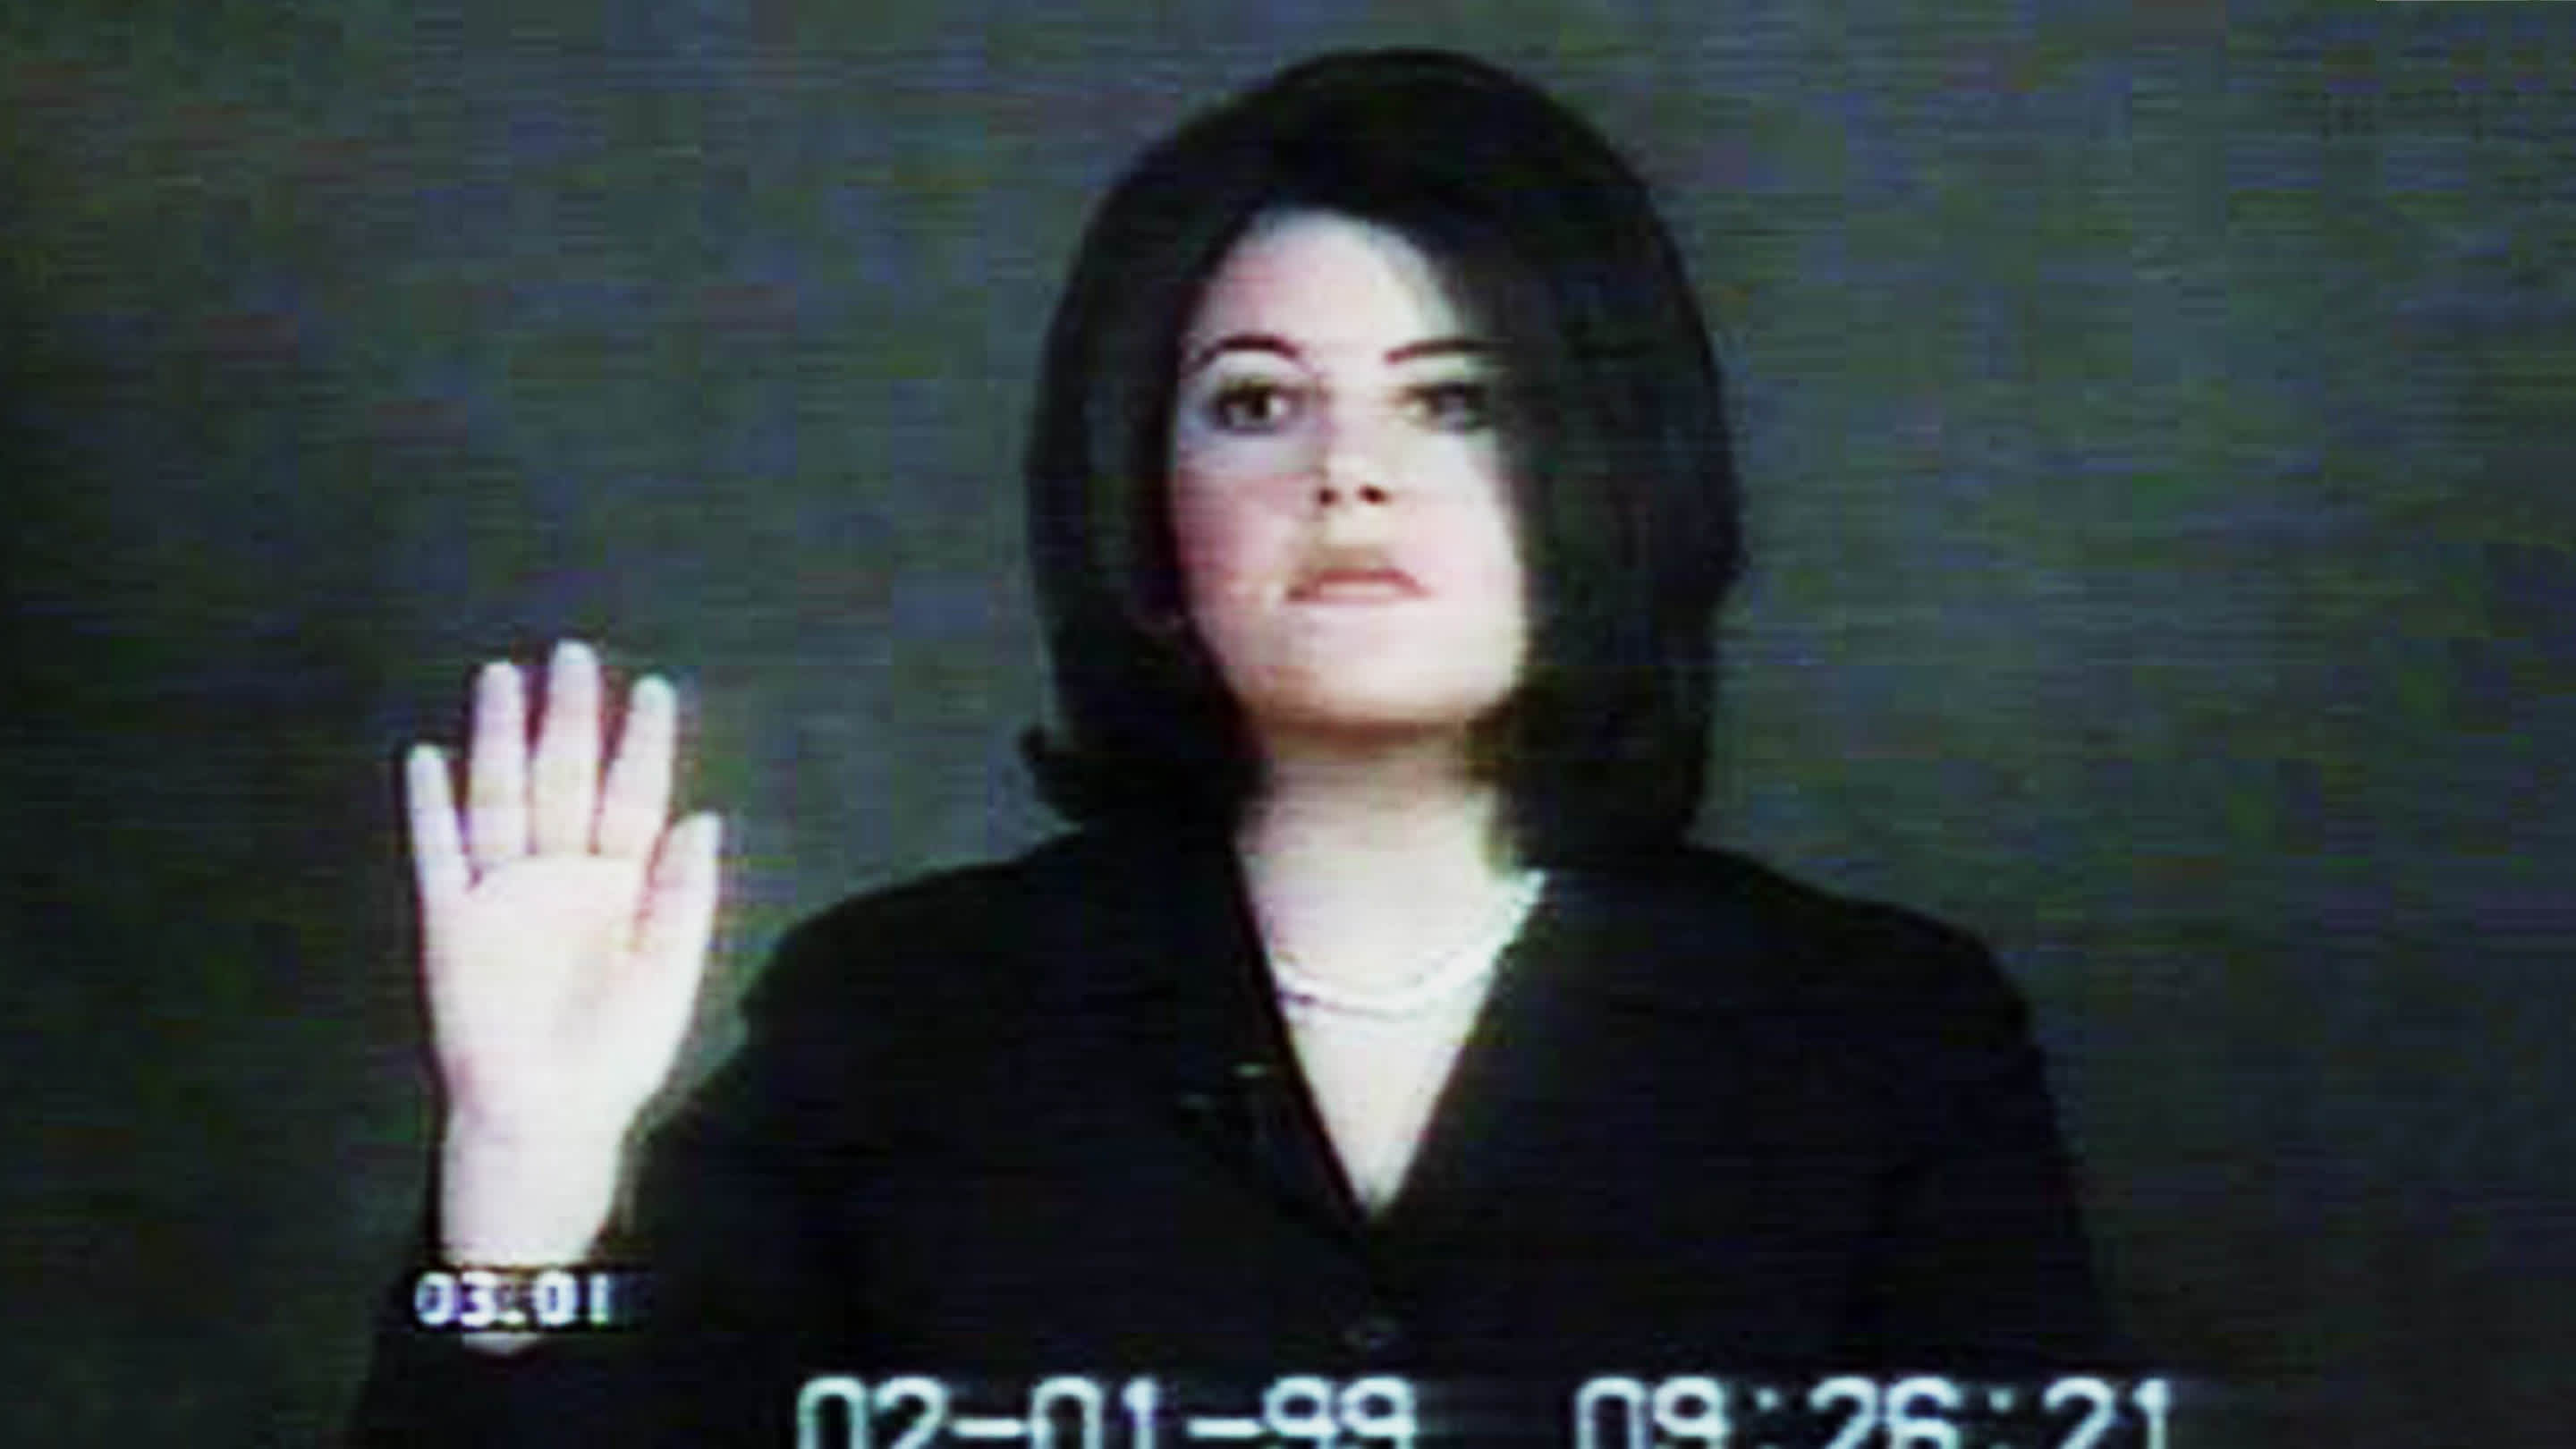 Youngest Girl Blowjobs Black - We All Owe Monica Lewinsky an Apology